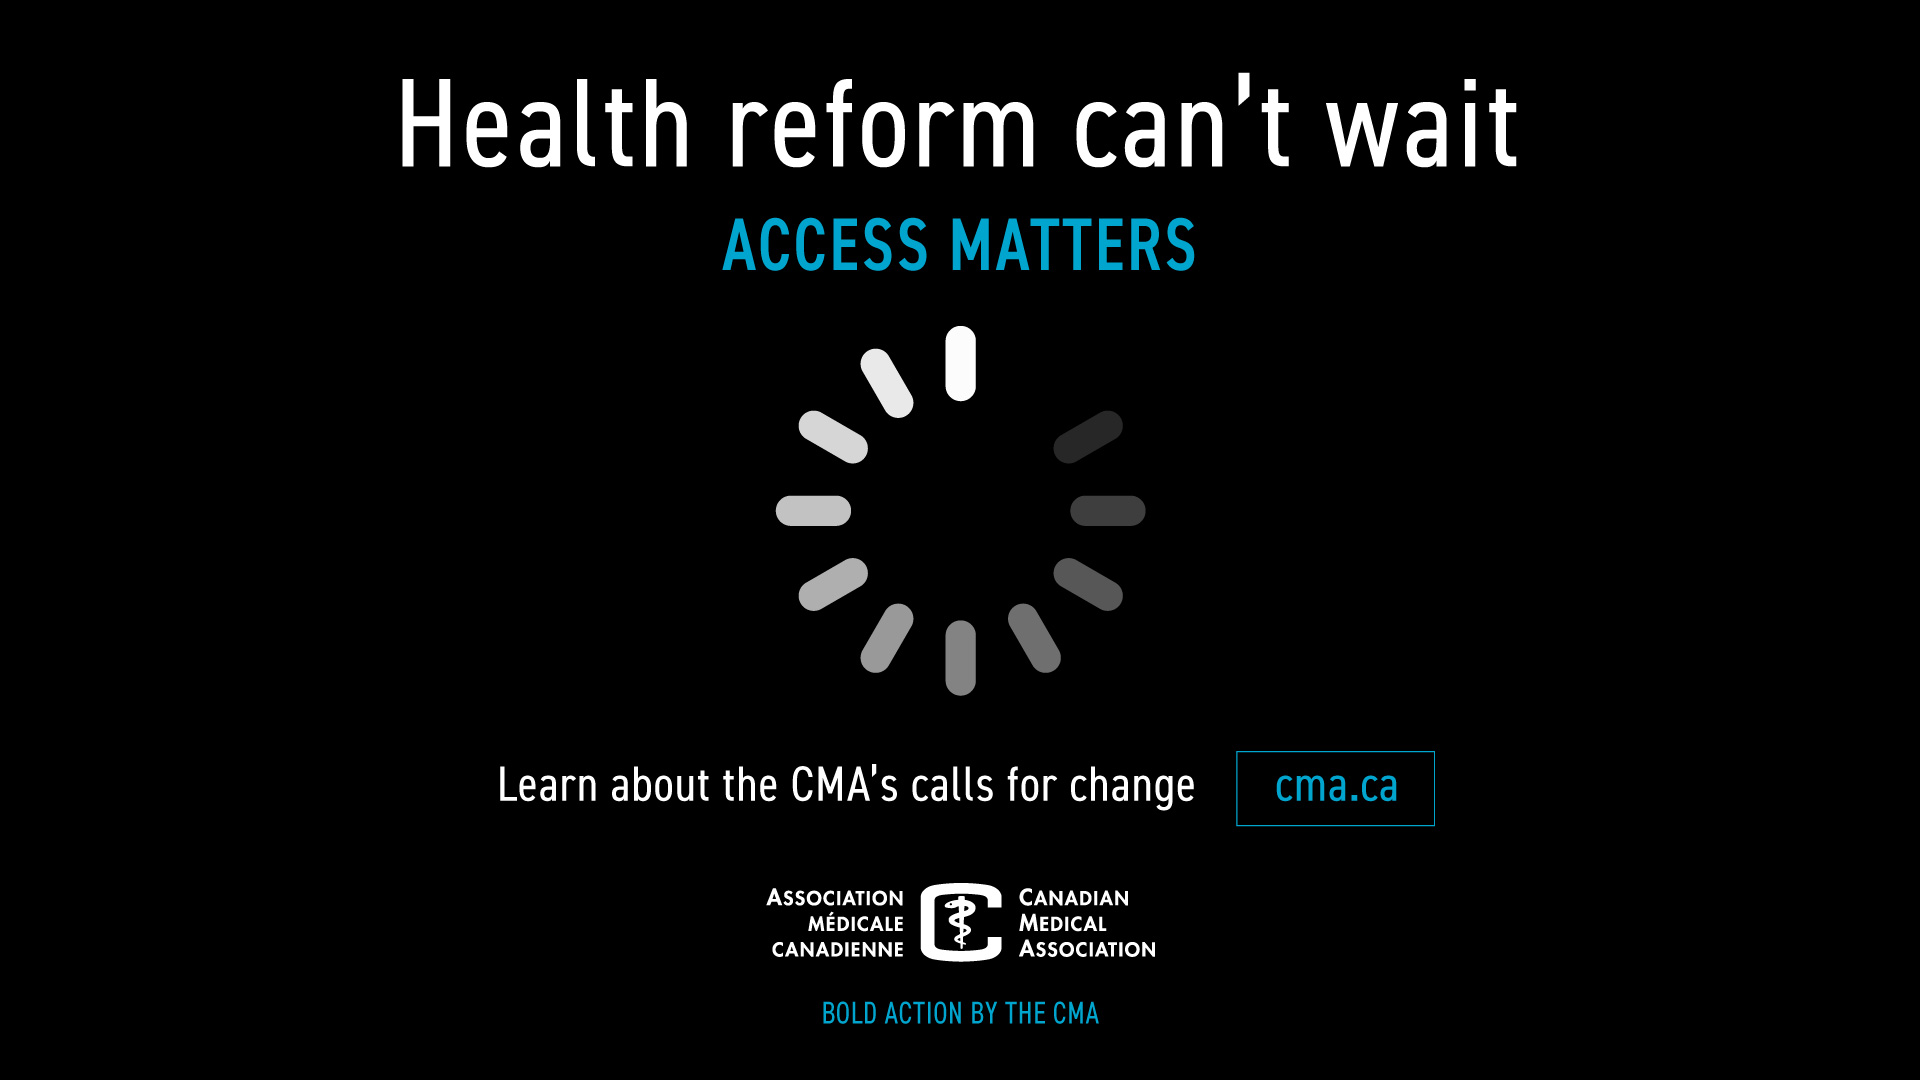 Health reform can't wait. Access matters. Learn about the CMA's calls for change at cma.ca.